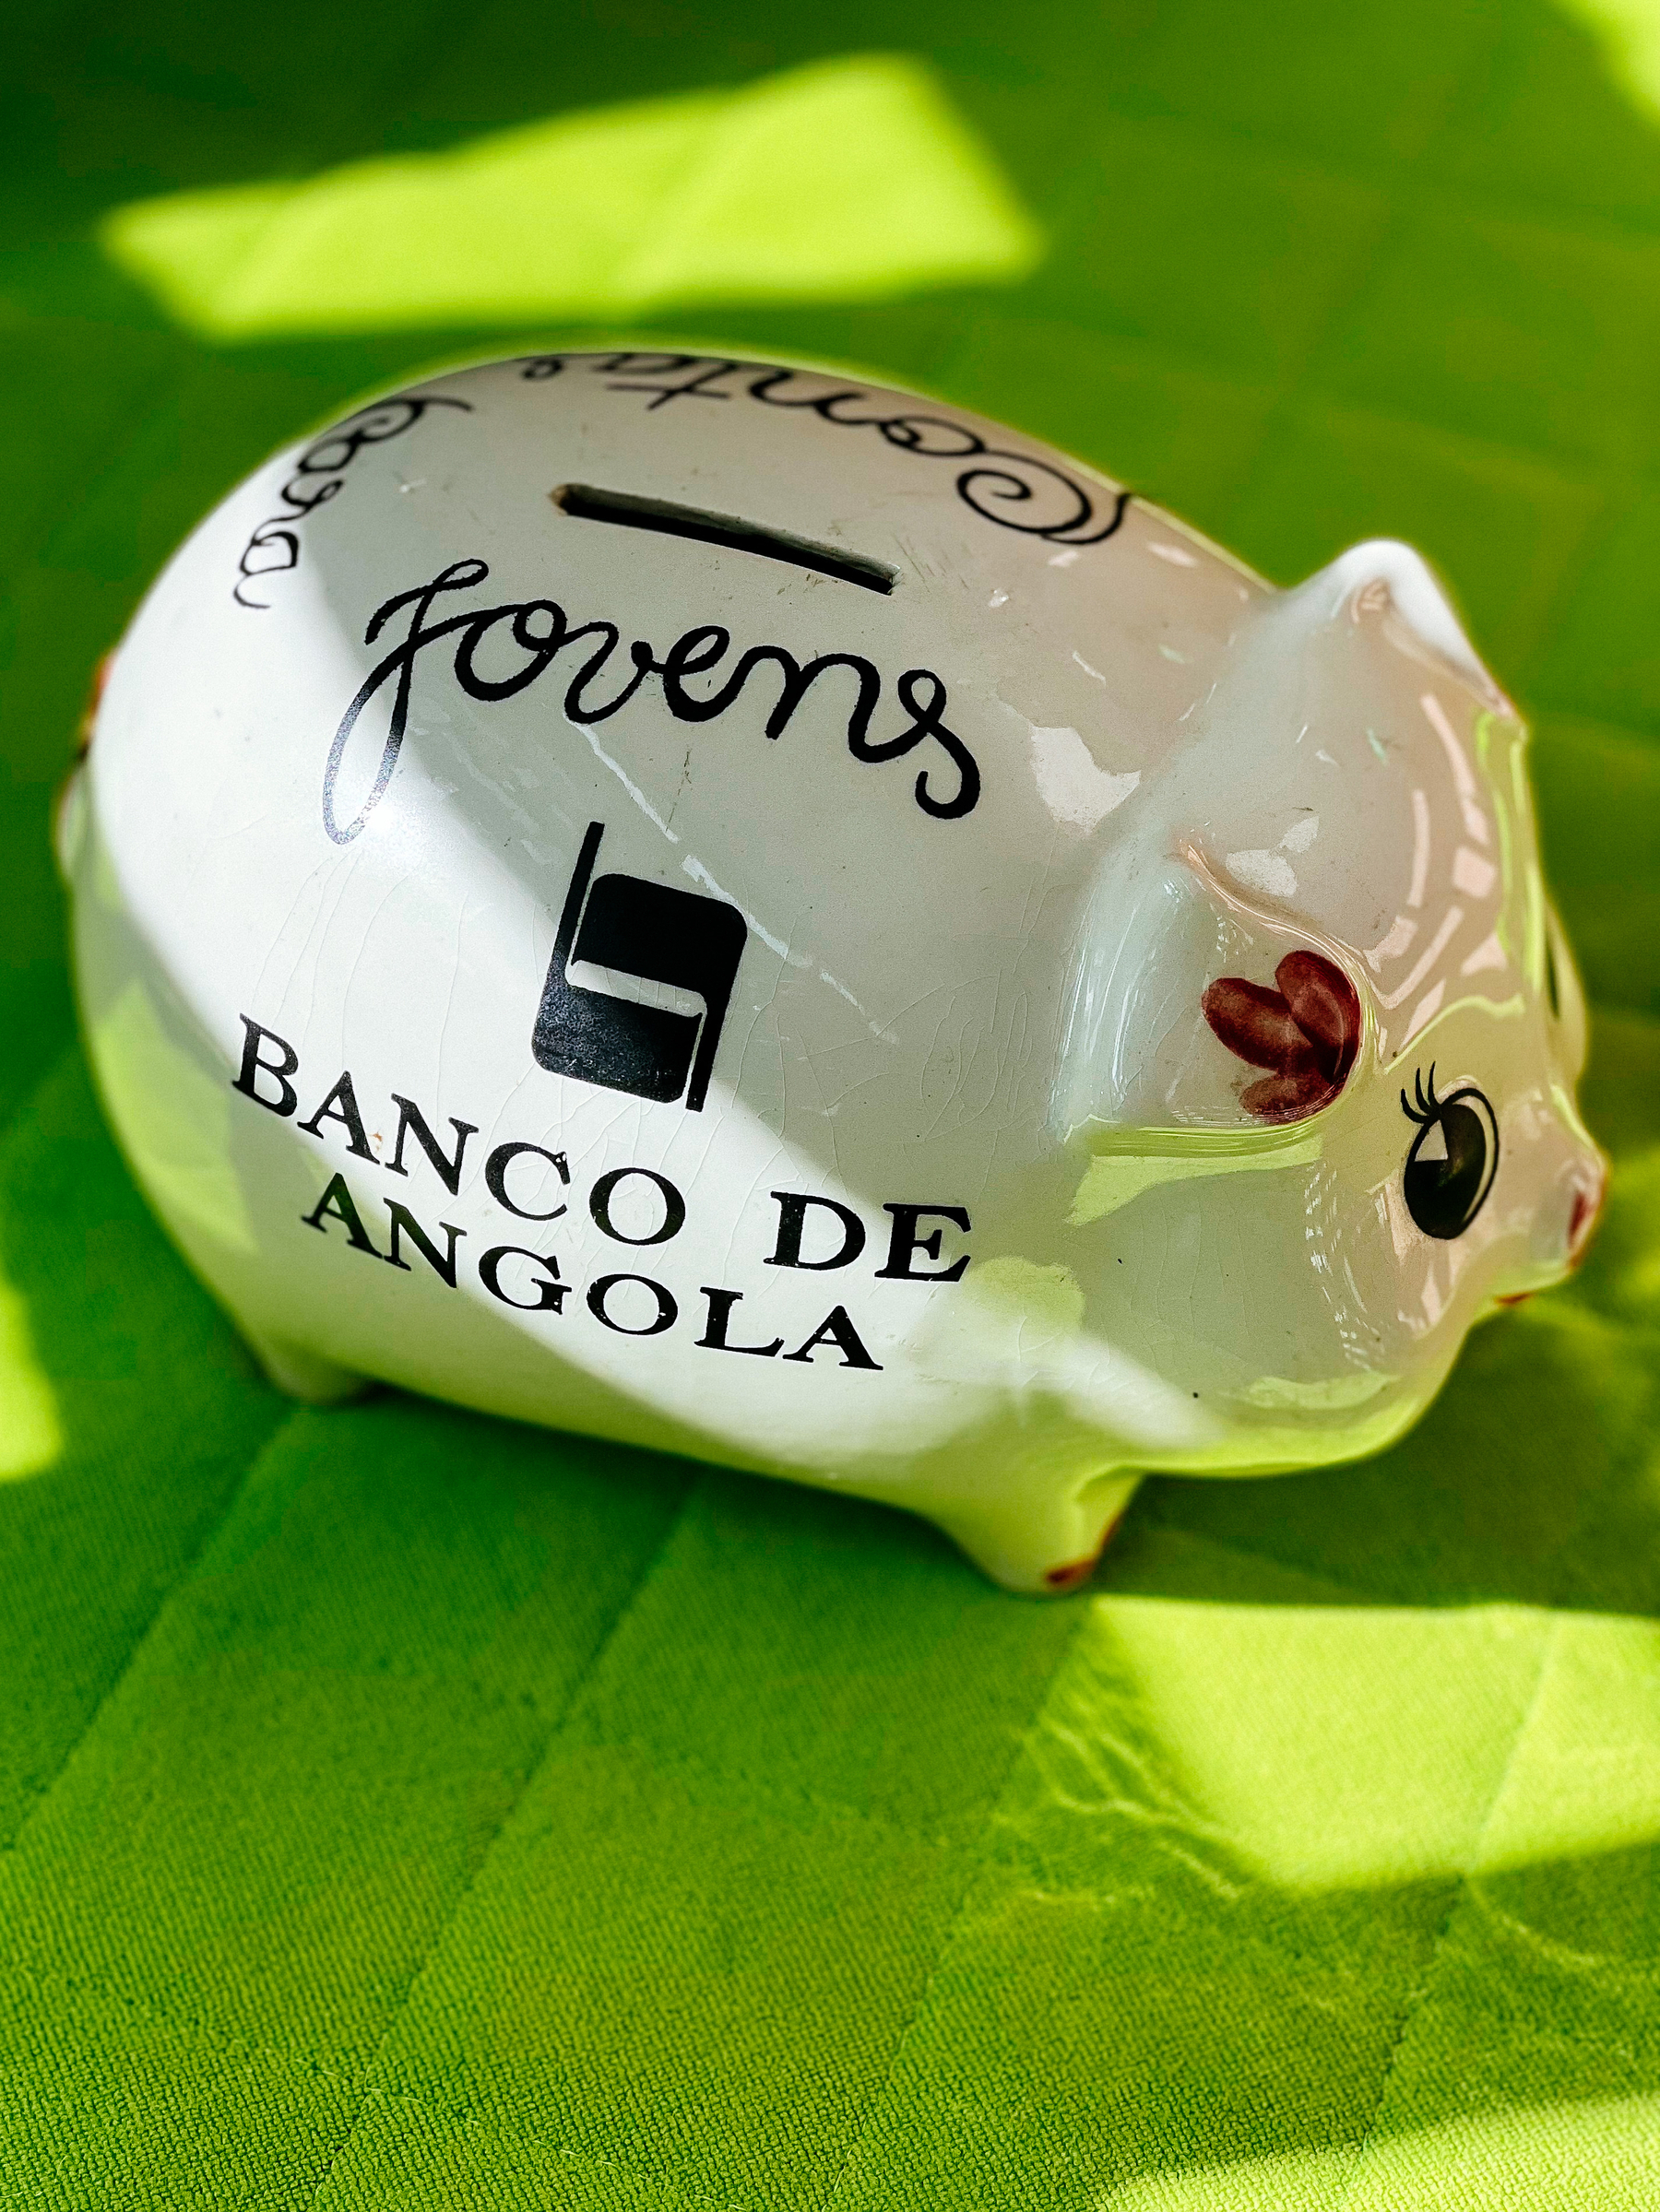 a piggy bank with “Banco de Angola” written on the side